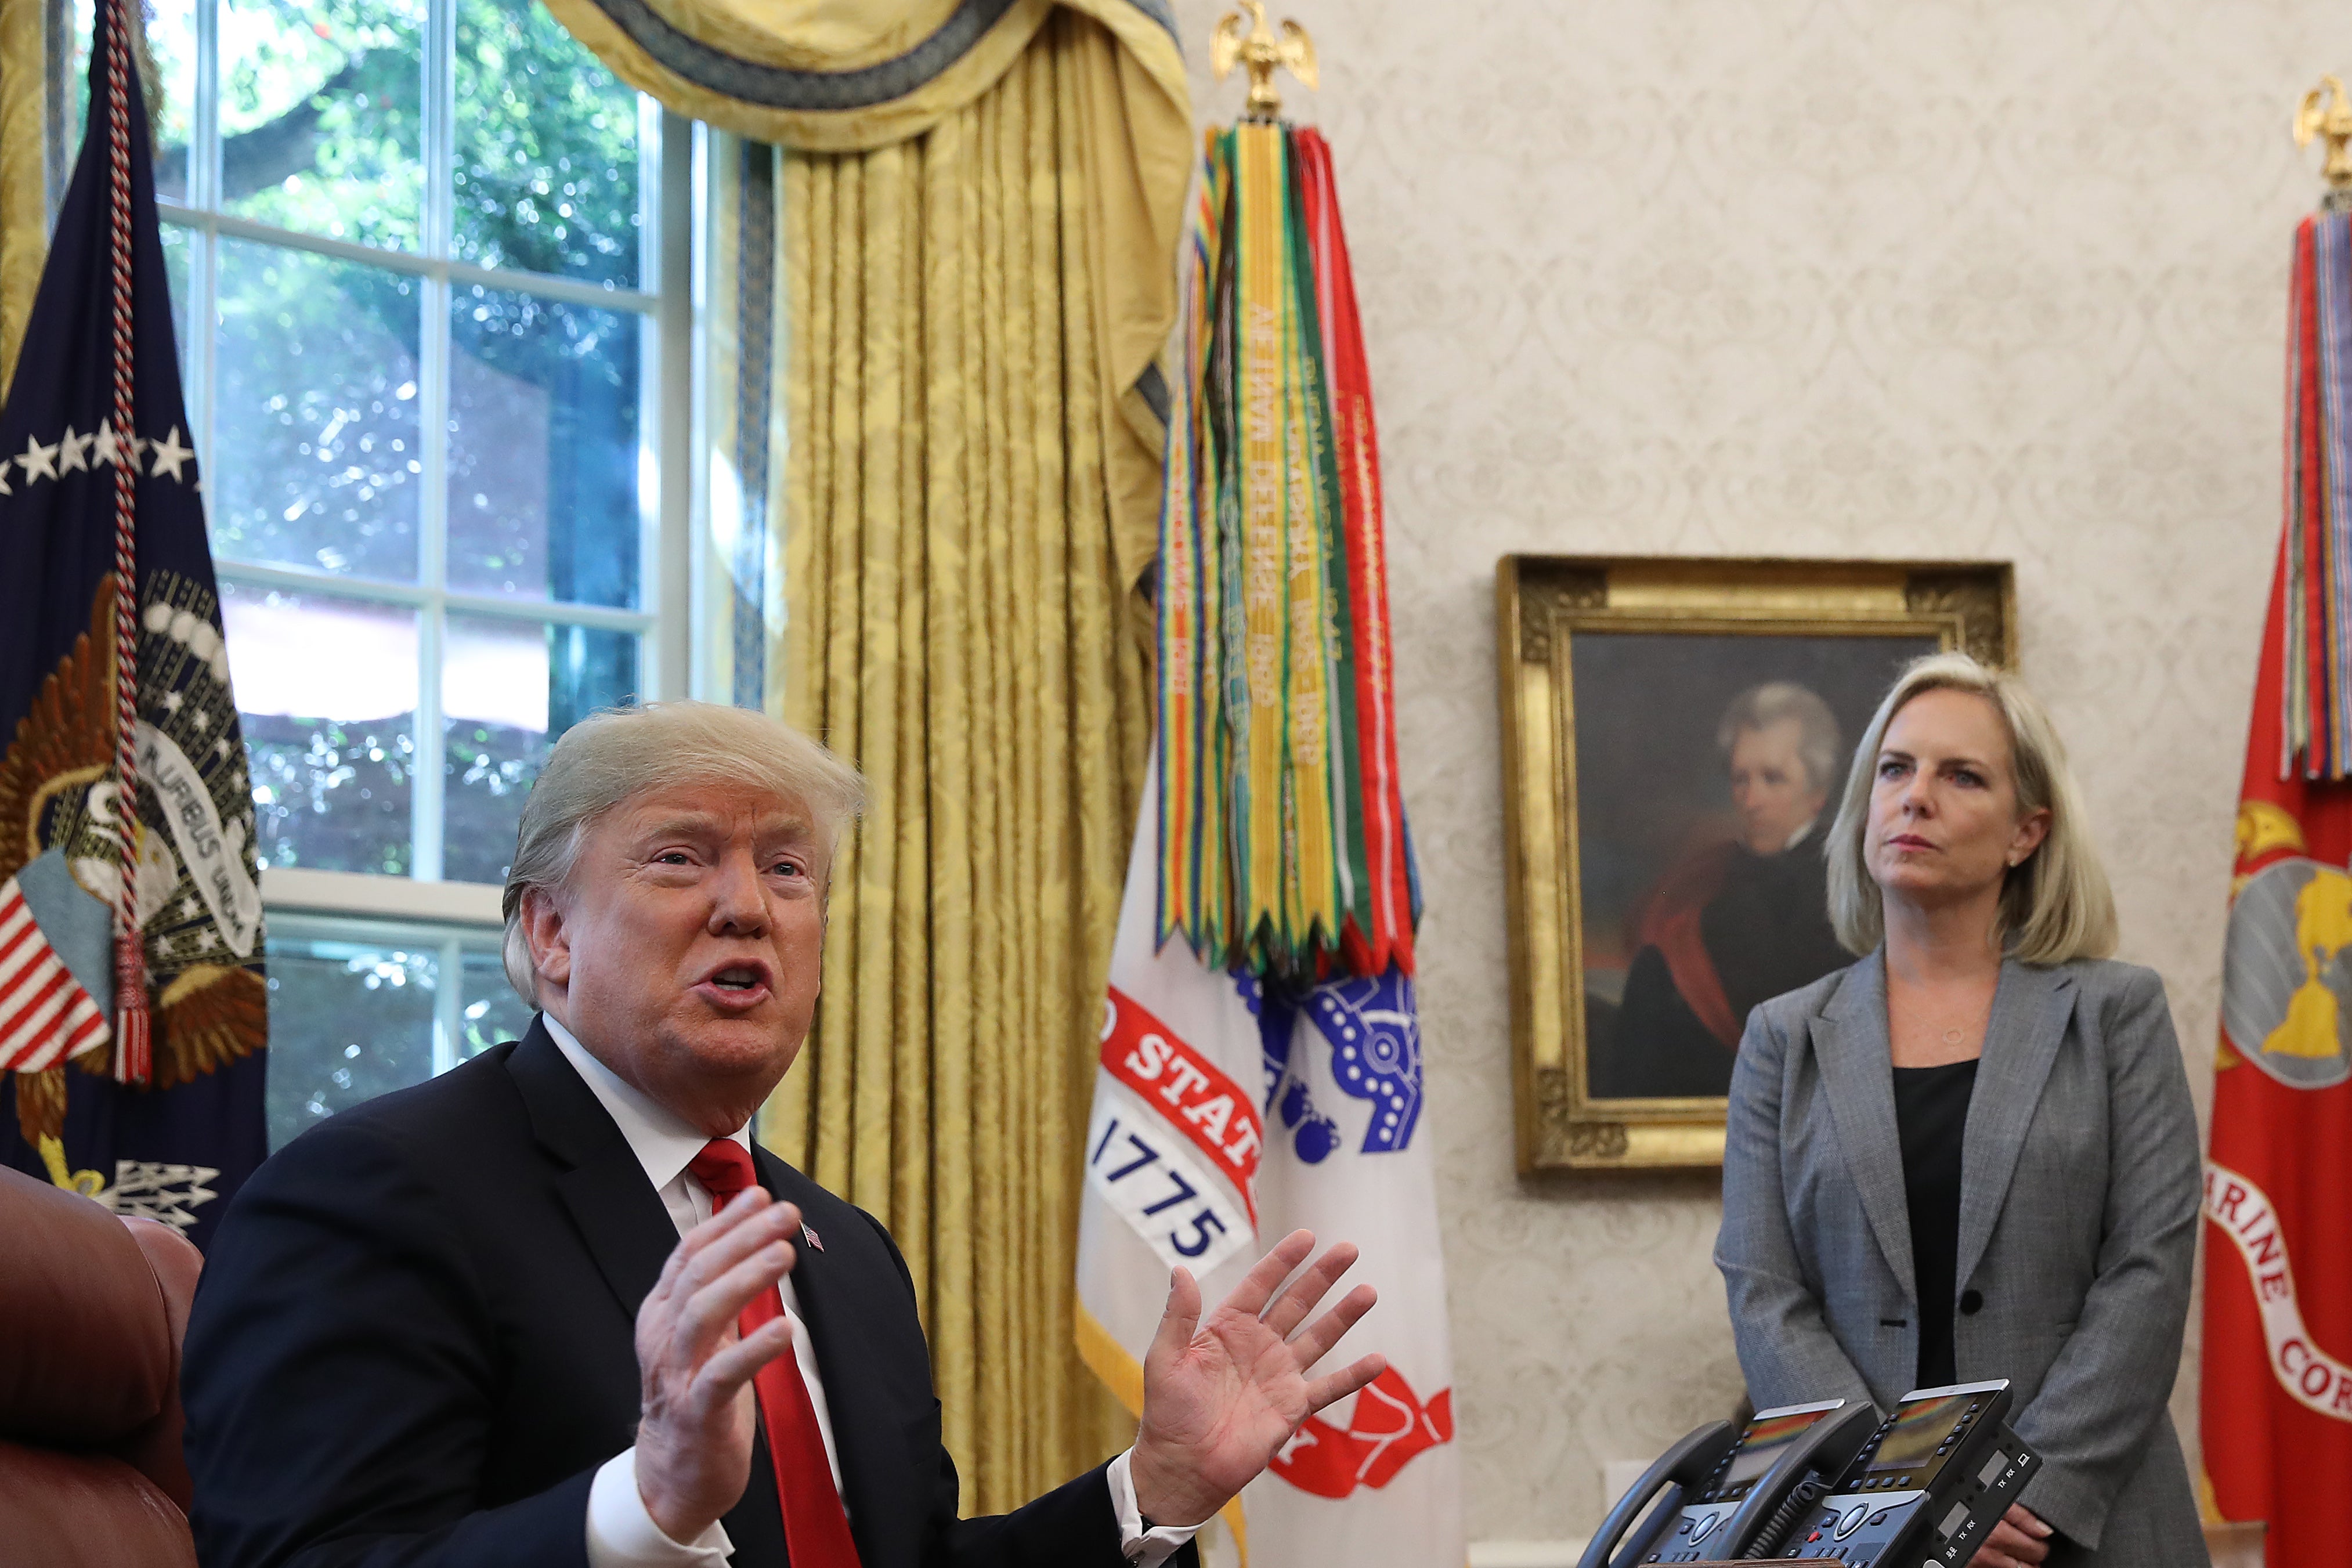 Trump, seated at a desk, gestures while speaking. Nielsen stands in the background.